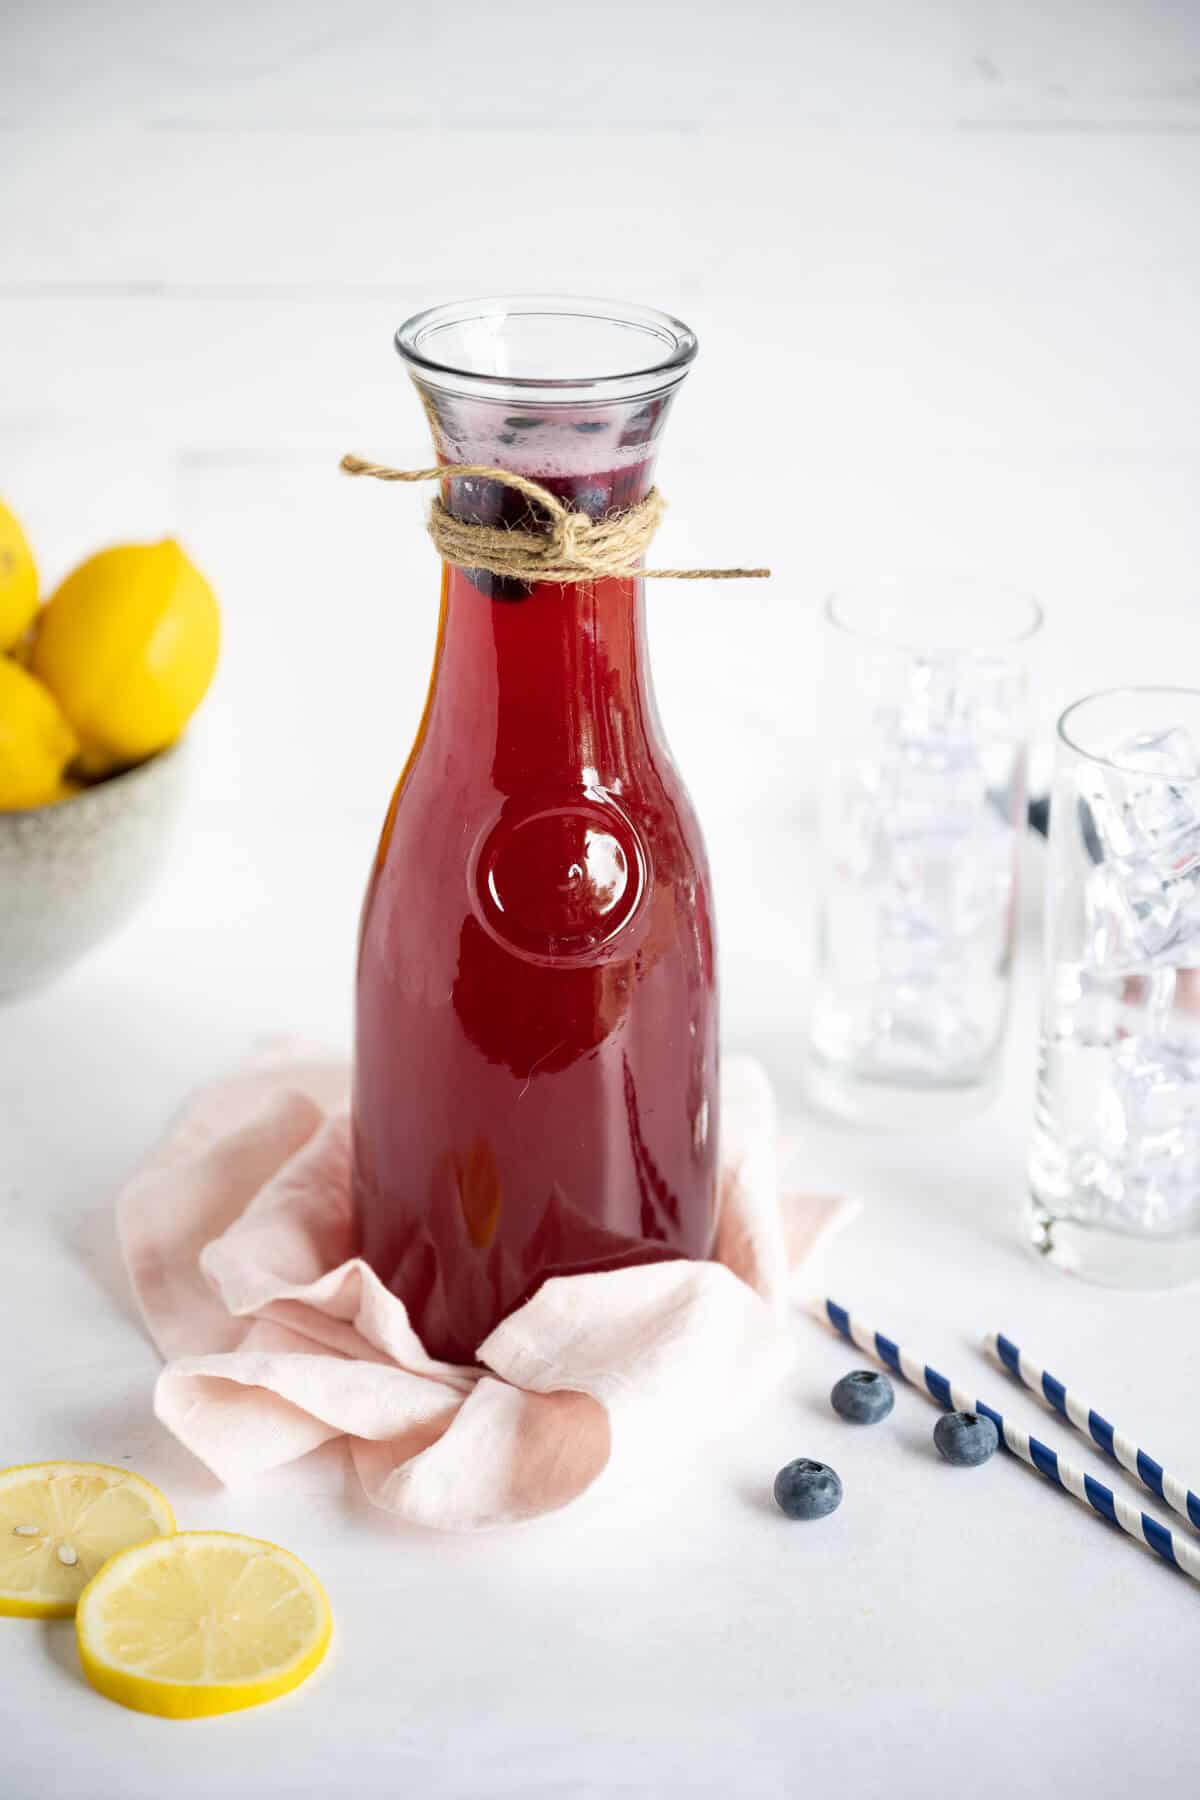 A carafe of homemade blueberry lemonade. Glasses of ice and fresh sliced lemons are nearby.